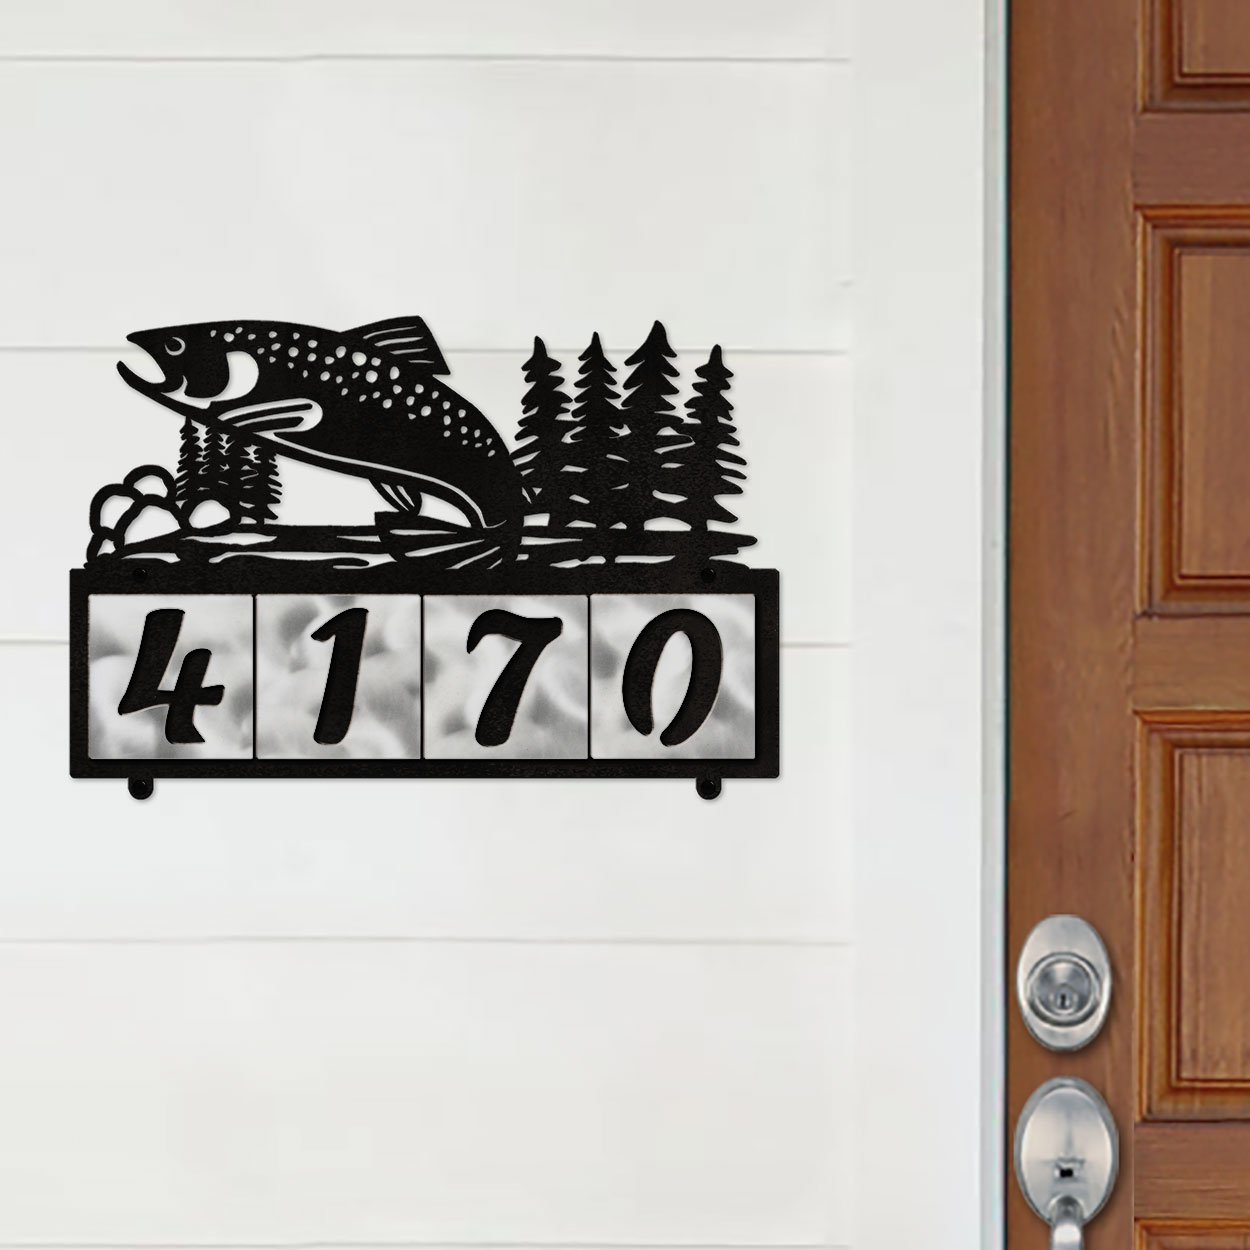 607254 - Jumping Trout in Stream Design 4-Digit Horizontal 4-inch Tile Outdoor House Numbers